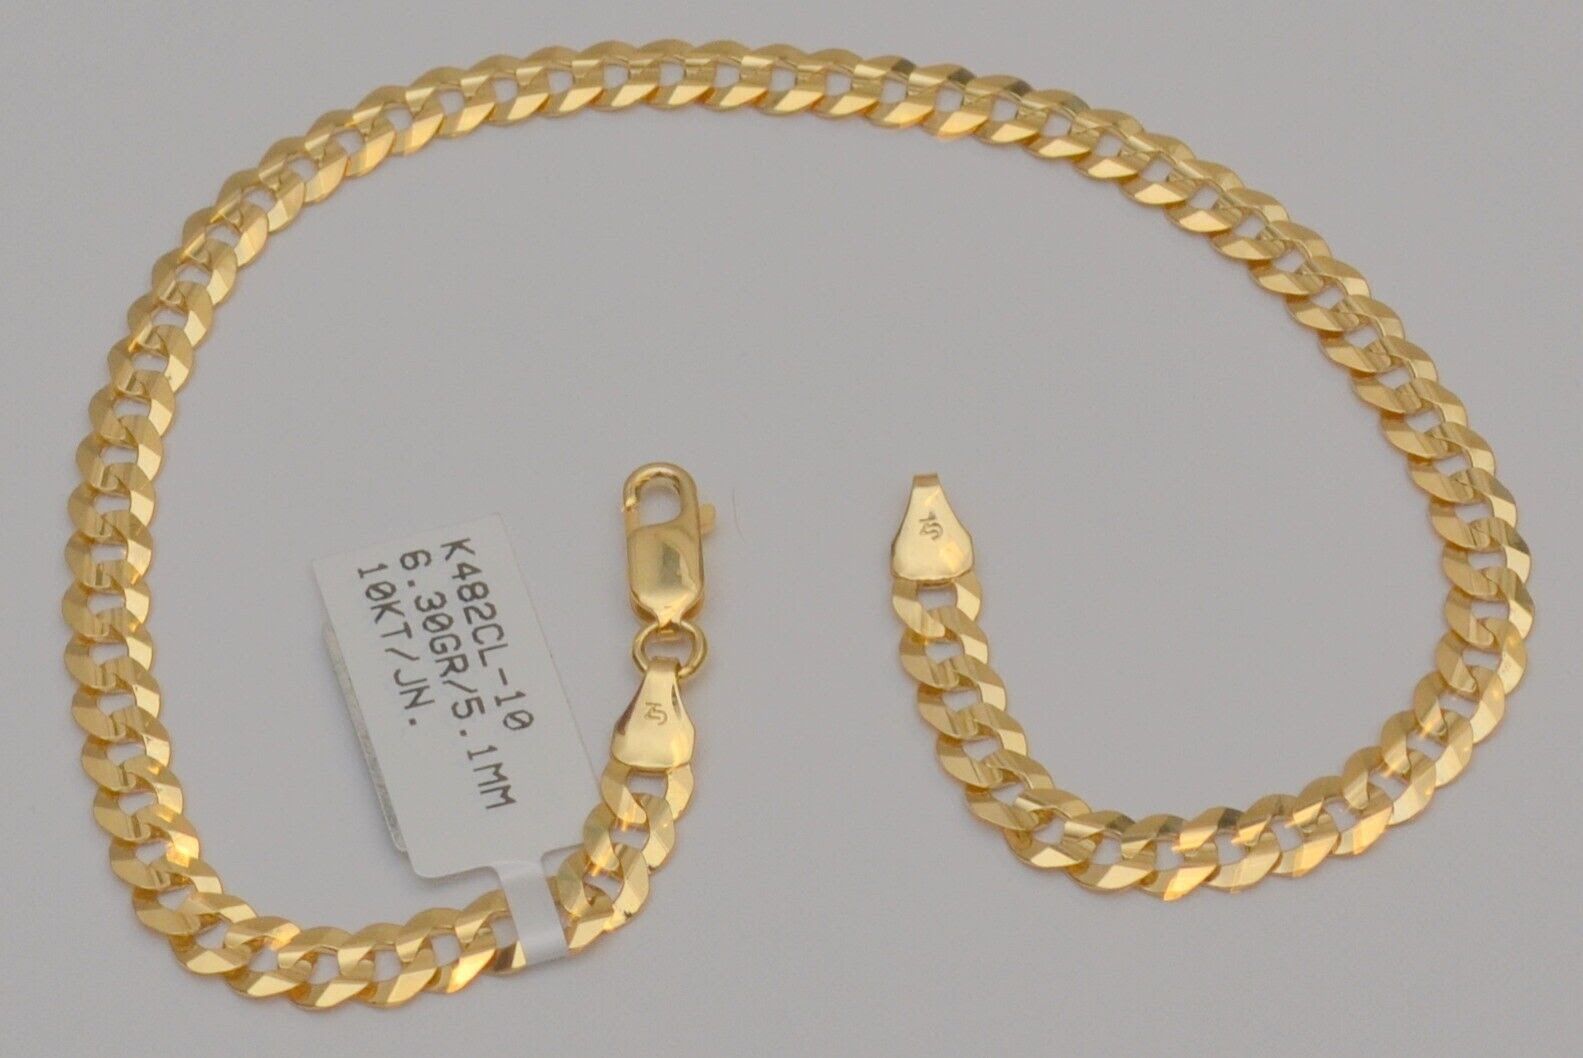 Gold chain 10k solid yellow cuban curb link anklet bracelet 10 in 5.0 mm 6.3 gr